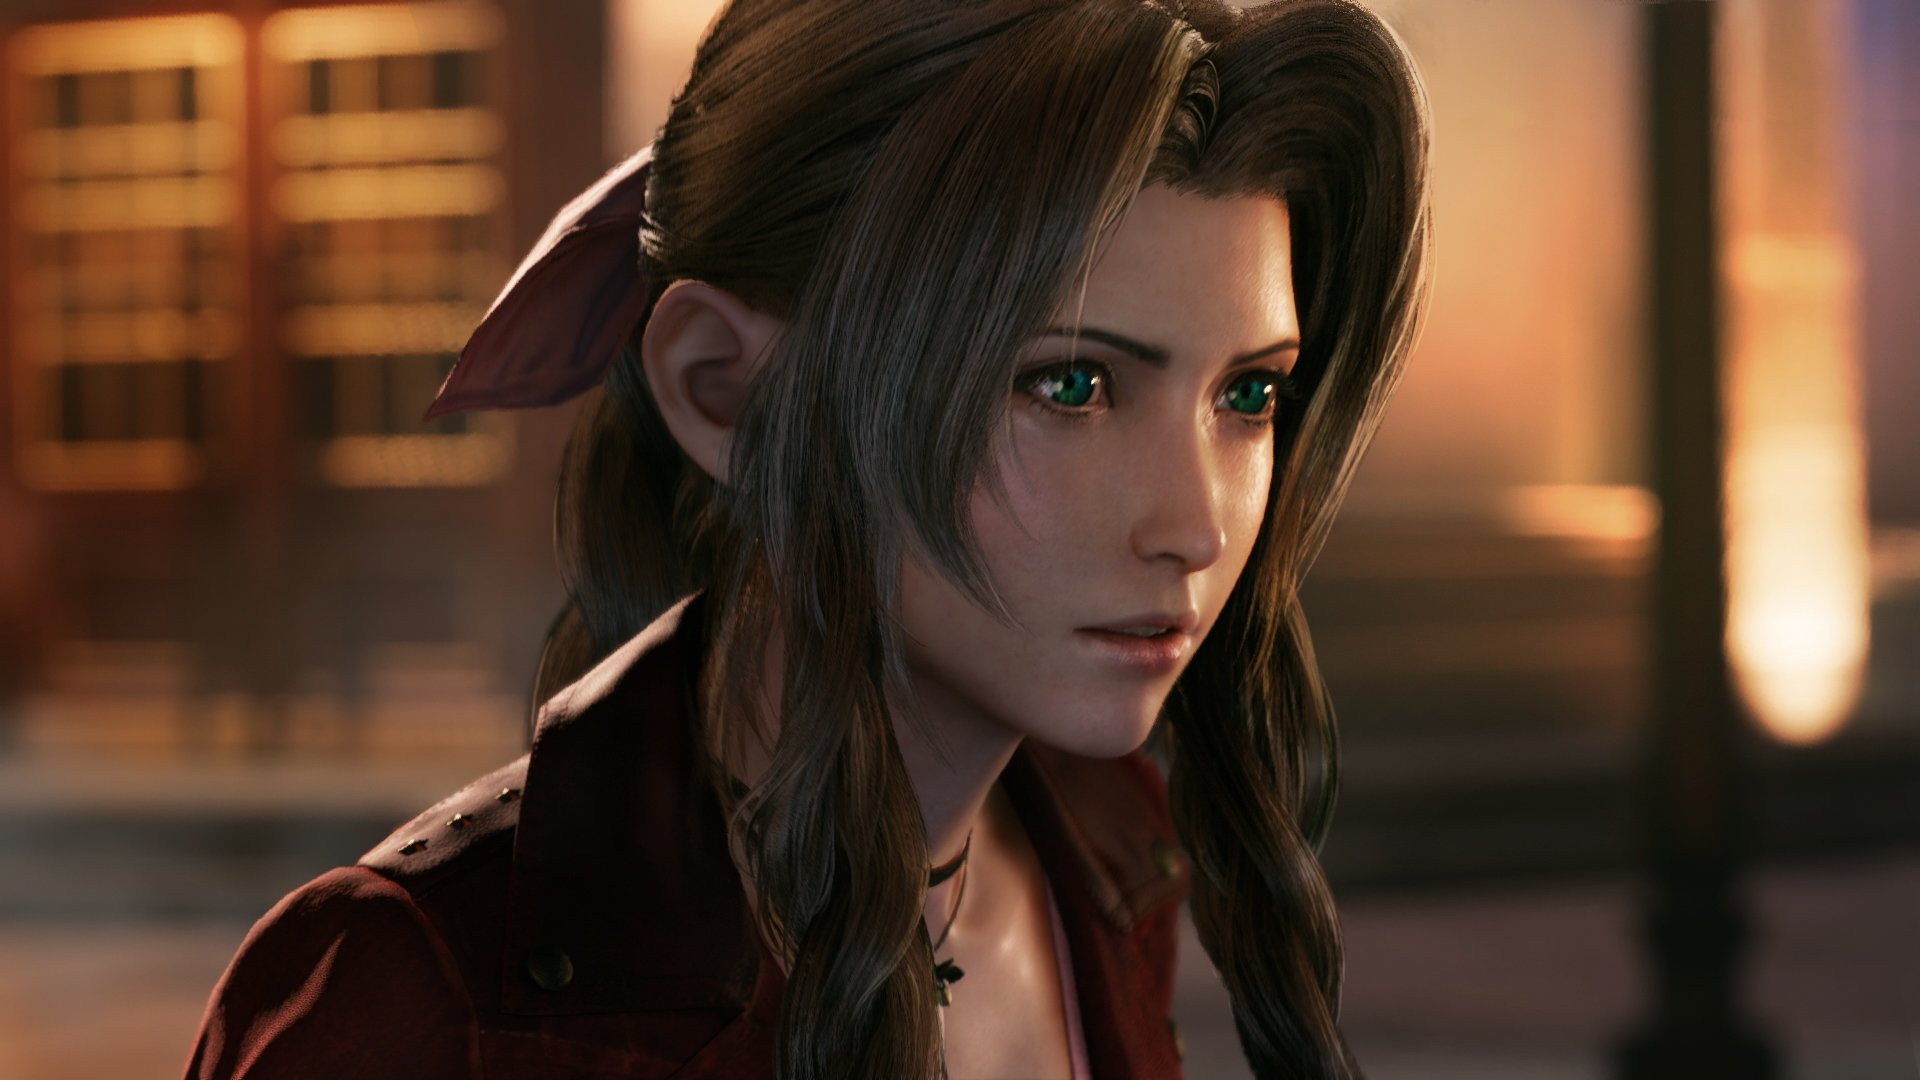  Final  Fantasy  VII  Remake launch message seemingly shows 